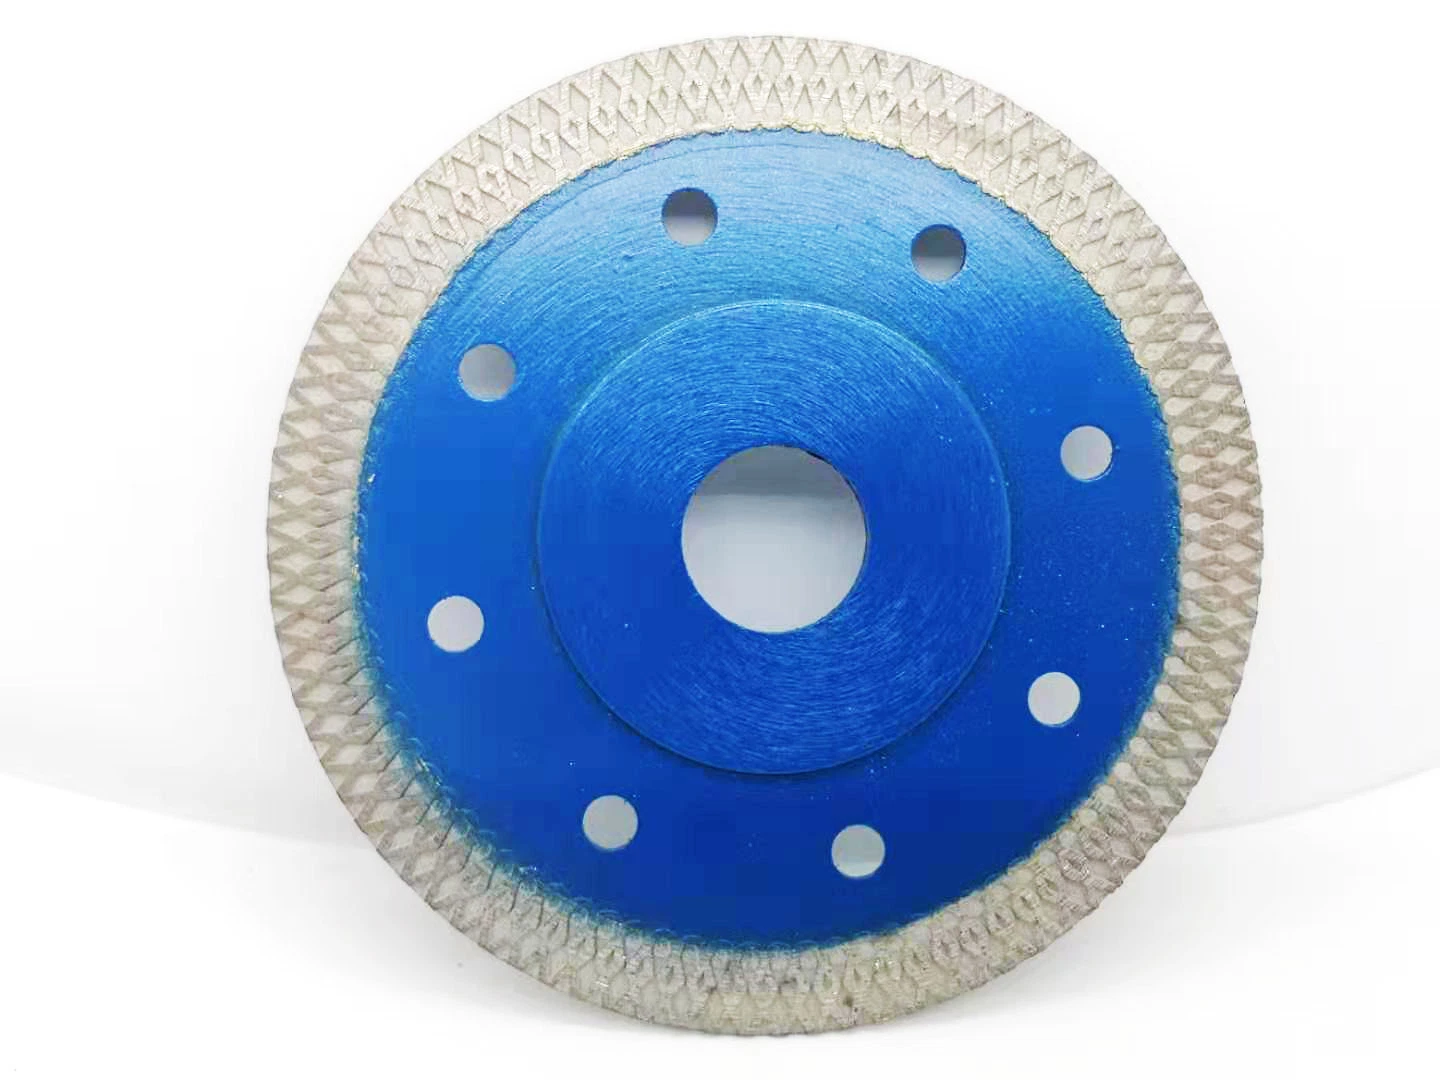 Special Segmented Diamond Turbo Cutter for Porcelain Tile Cutting Drily